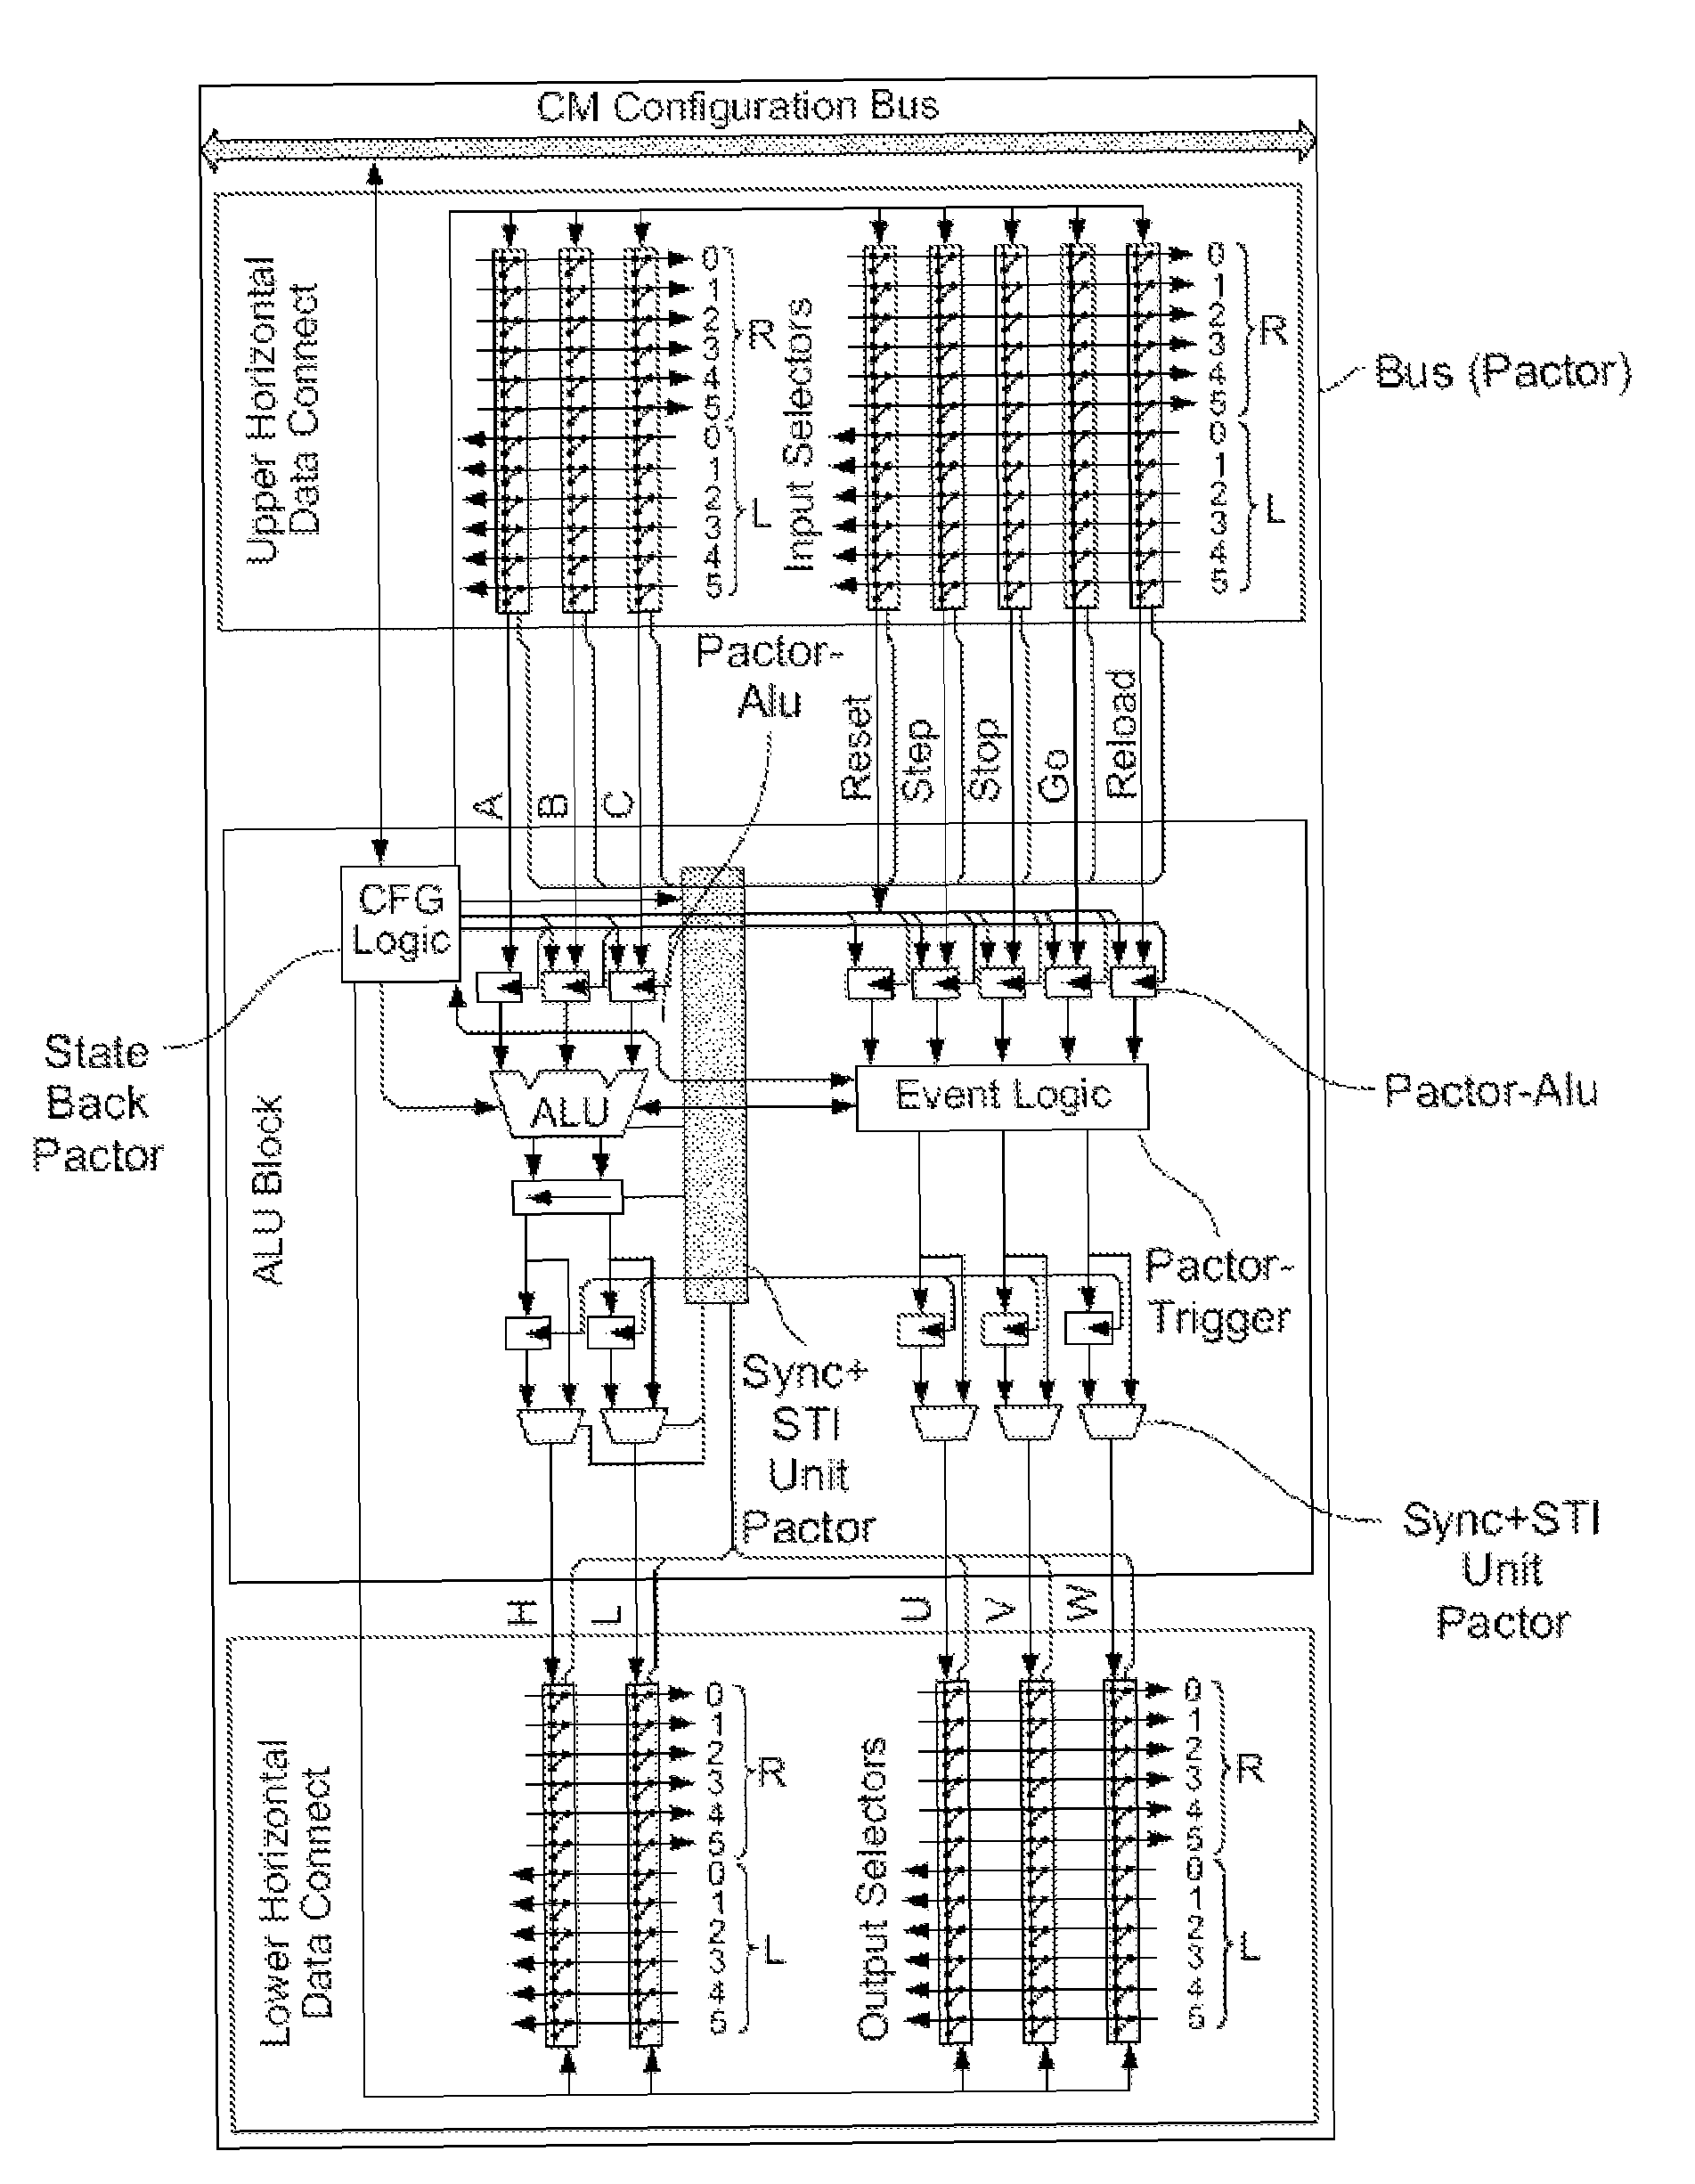 Logic cell array and bus system